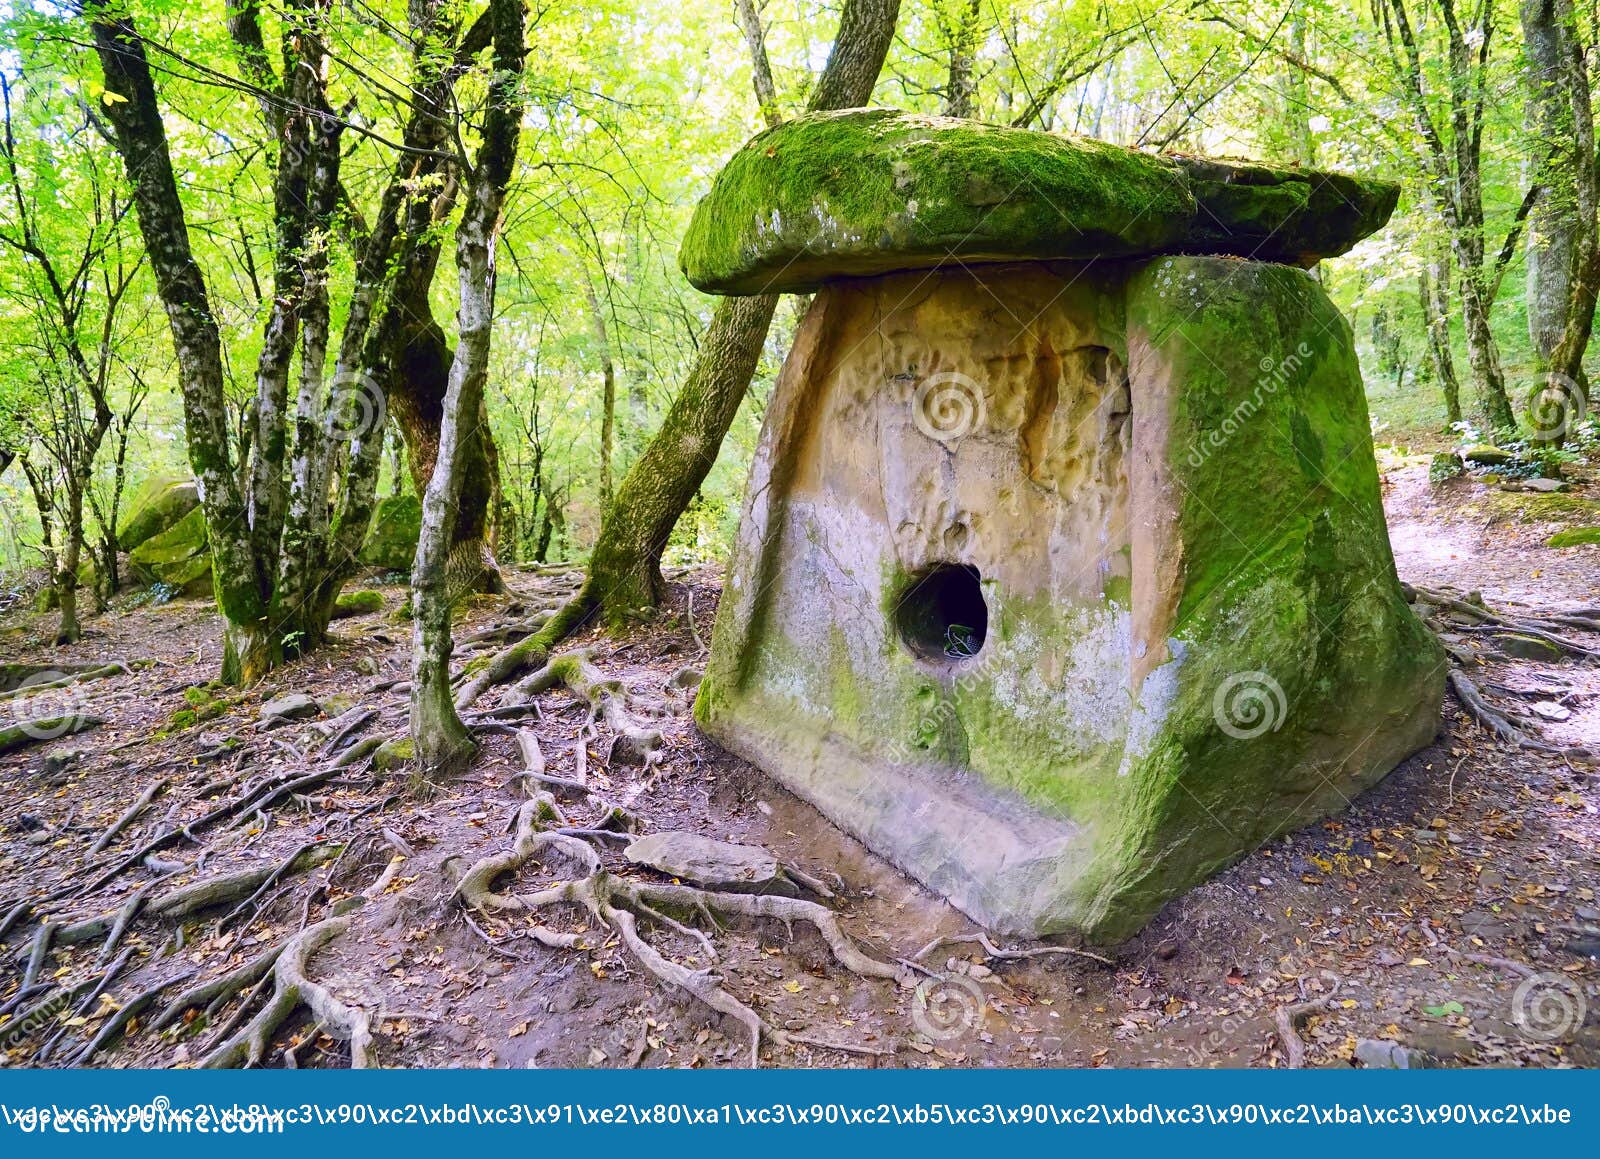 ancient megalithic construction - the tile of the dolmen, the village of pshada